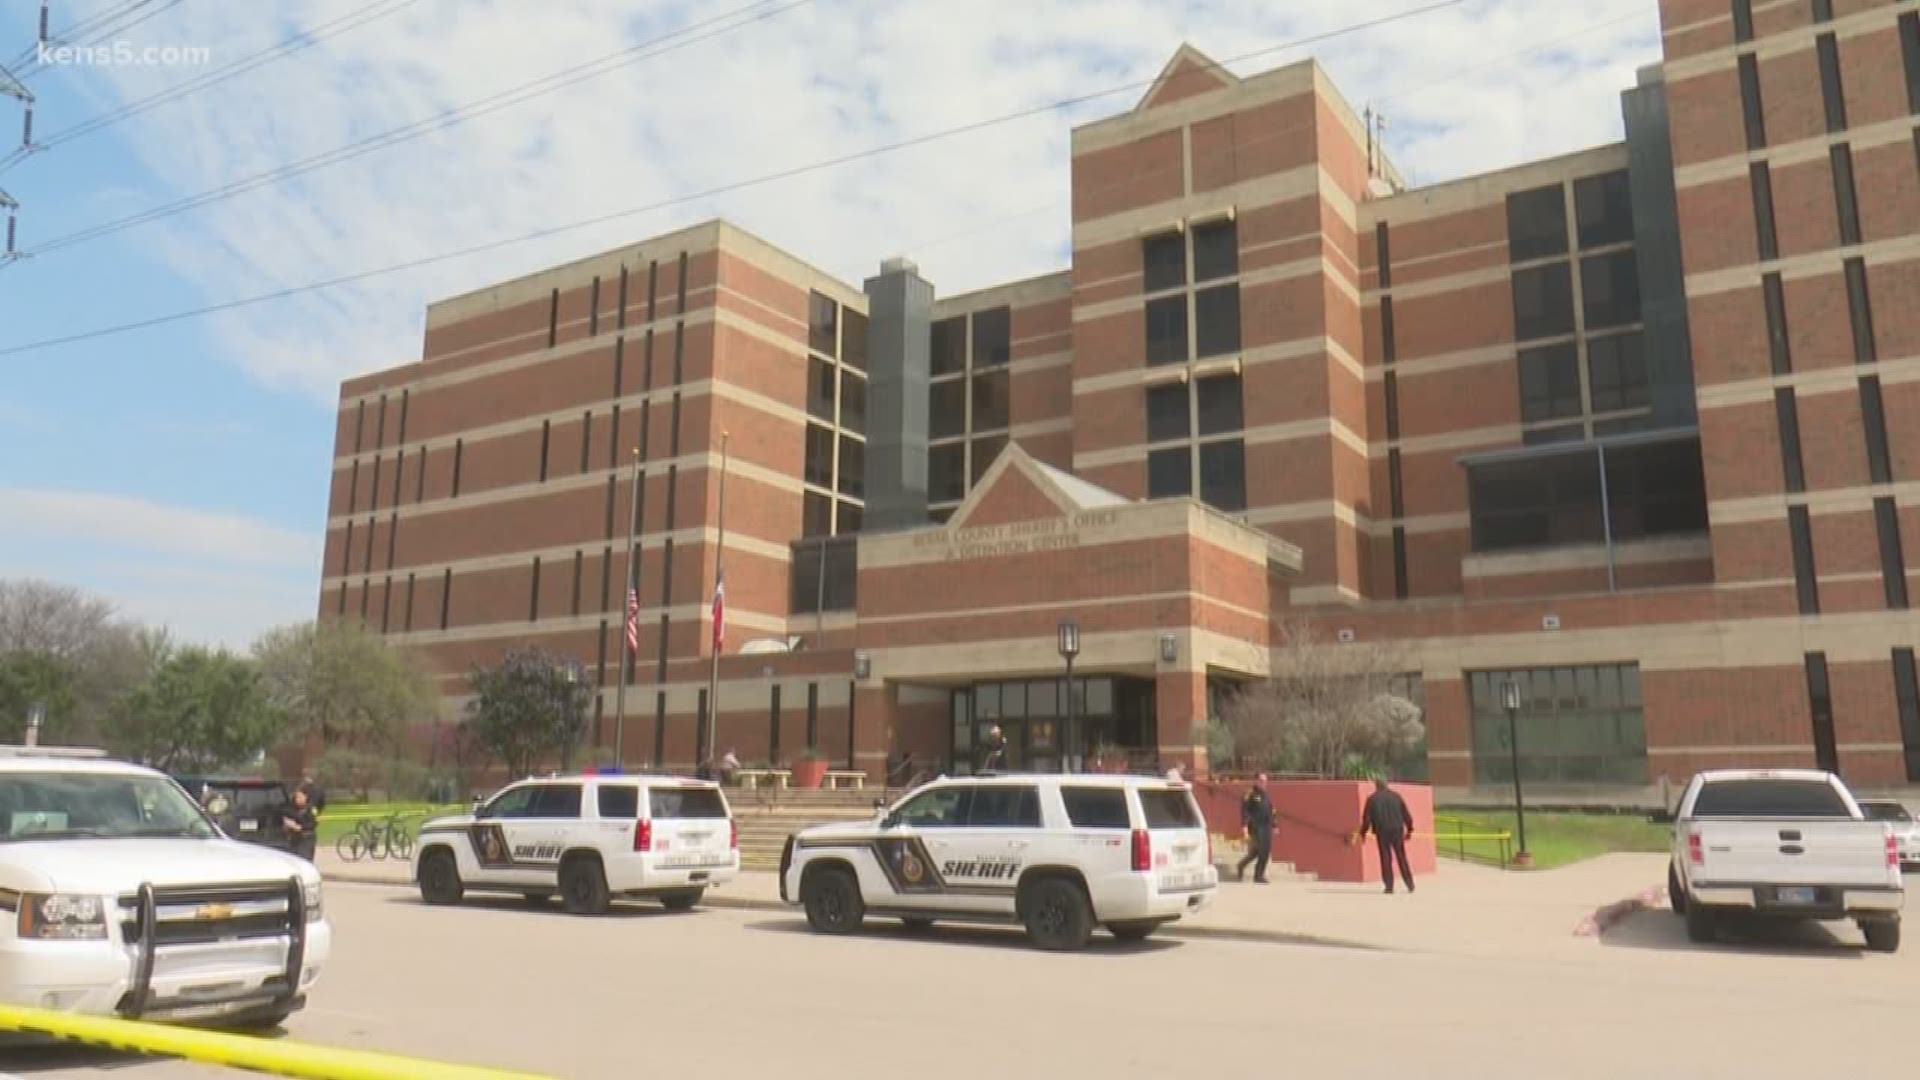 A report from the Texas Commission on Jail Standards found that the Bexar County Sheriff's Office had evidence of a planned escape but failed to stop it.